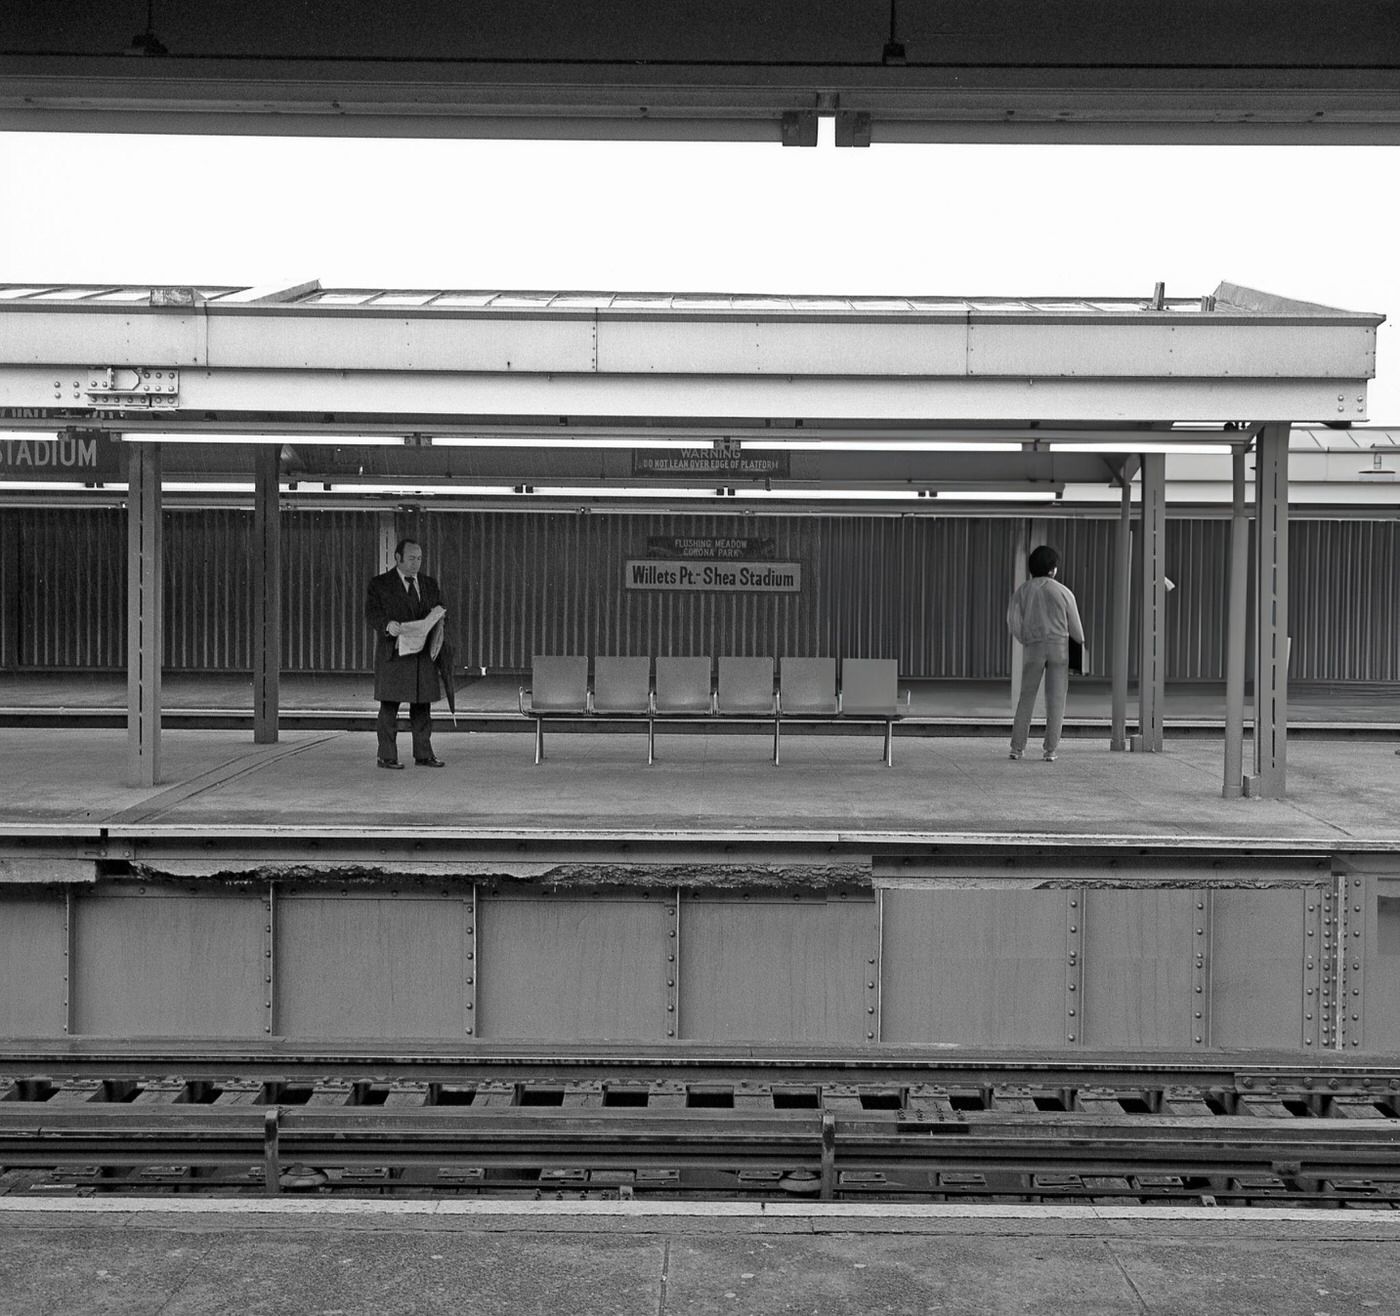 Commuters Waiting For A Train At The Willets Point-Shea Stadium Subway Station In Queens' Corona, 1975.